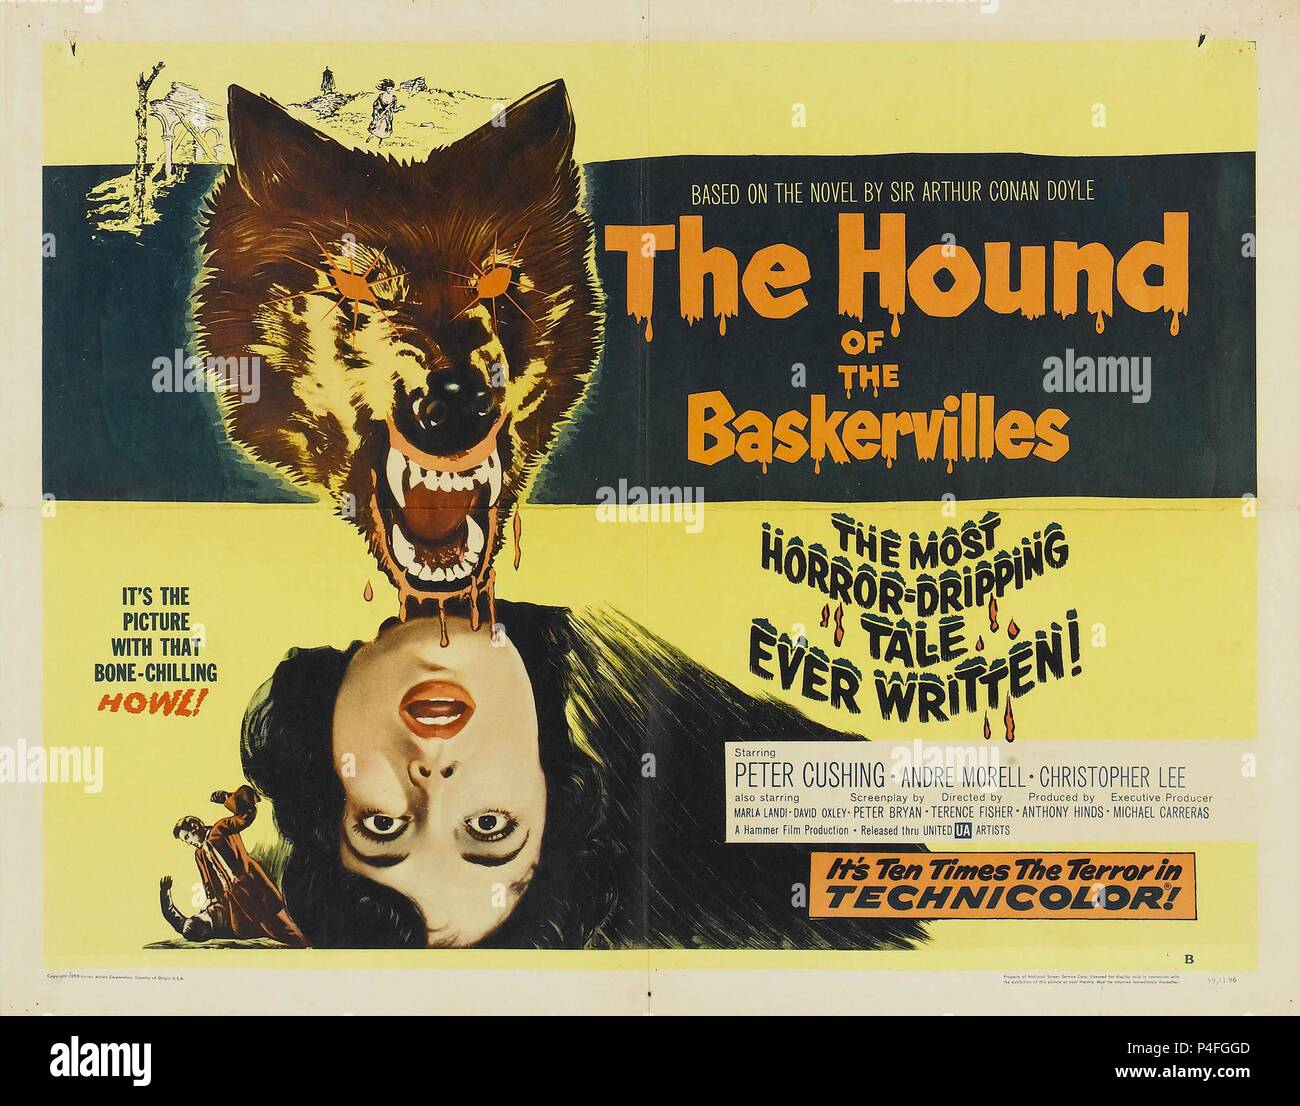 Original Film Title: THE HOUND OF THE BASKERVILLES. English Title: THE  HOUND OF THE BASKERVILLES. Film Director: TERENCE FISHER. Year: 1959.  Credit: HAMMER/UNITED ARTISTS / Album Stock Photo - Alamy